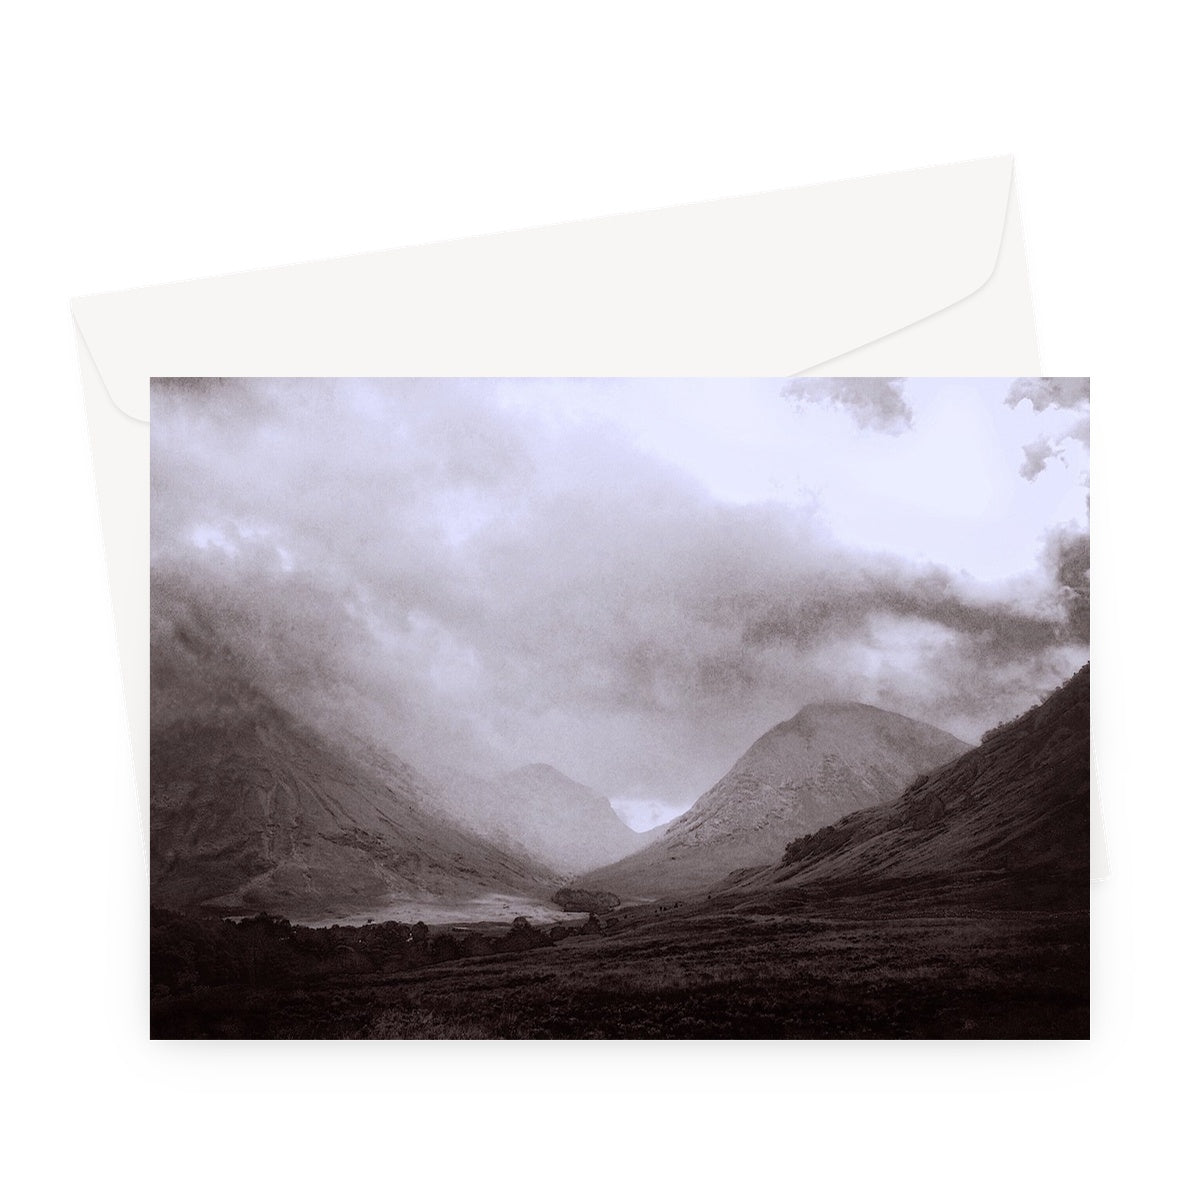 Glencoe Mist Art Gifts Greeting Card-Greetings Cards-Glencoe Art Gallery-A5 Landscape-10 Cards-Paintings, Prints, Homeware, Art Gifts From Scotland By Scottish Artist Kevin Hunter